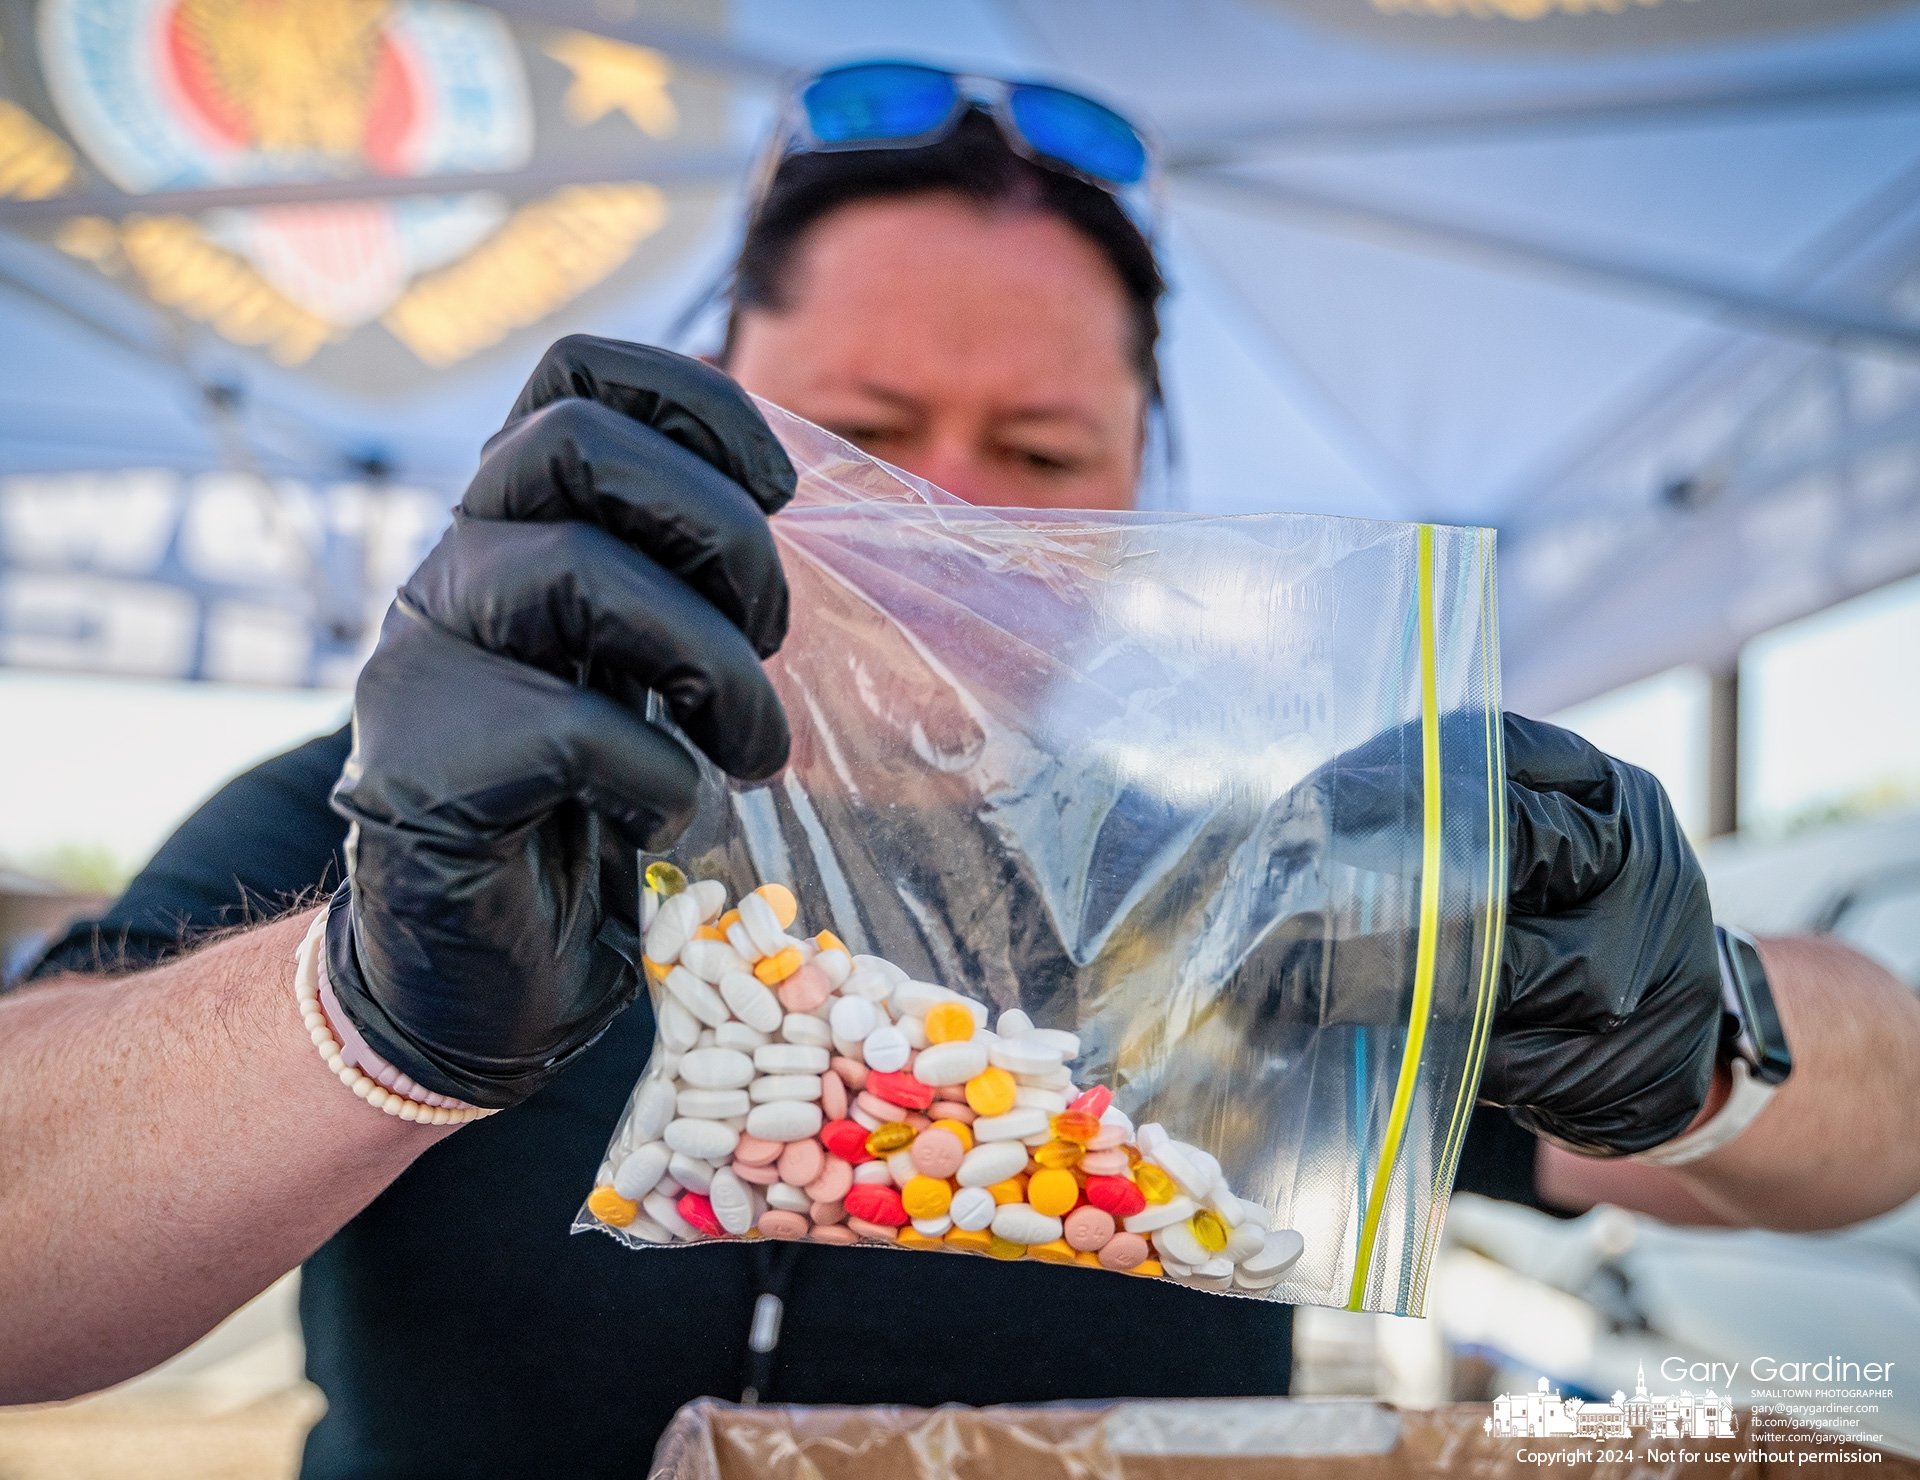 A Blendon Township police officer empties a baggie filled with prescription drugs into a holding container during National Drug Take Back Day. My Final Photo for April 27, 2024.